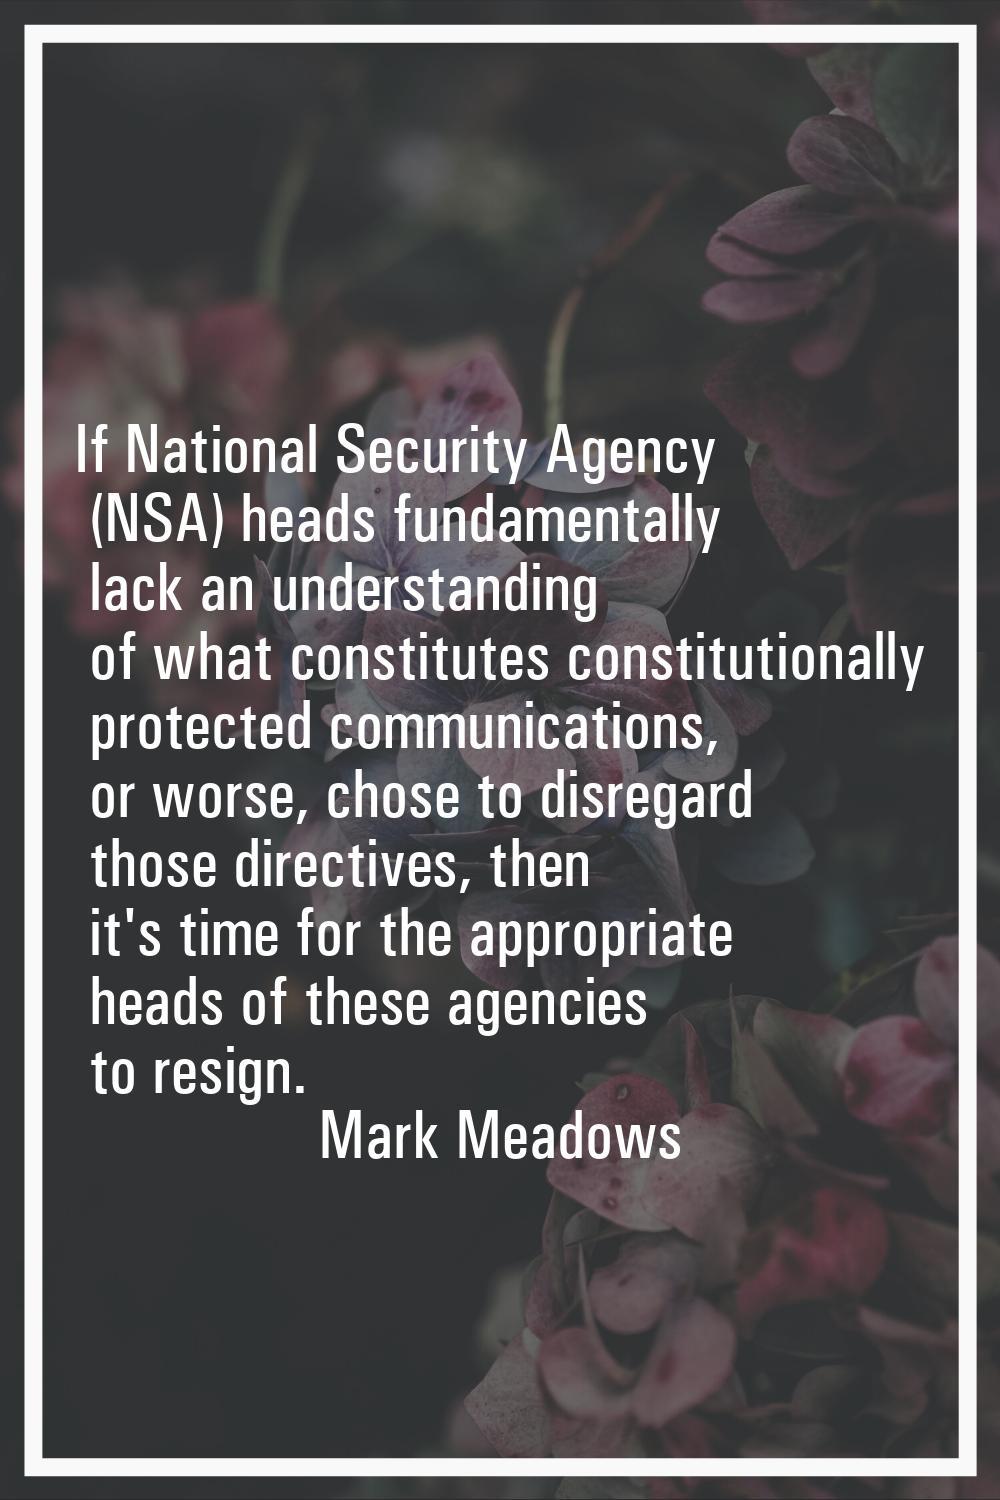 If National Security Agency (NSA) heads fundamentally lack an understanding of what constitutes con